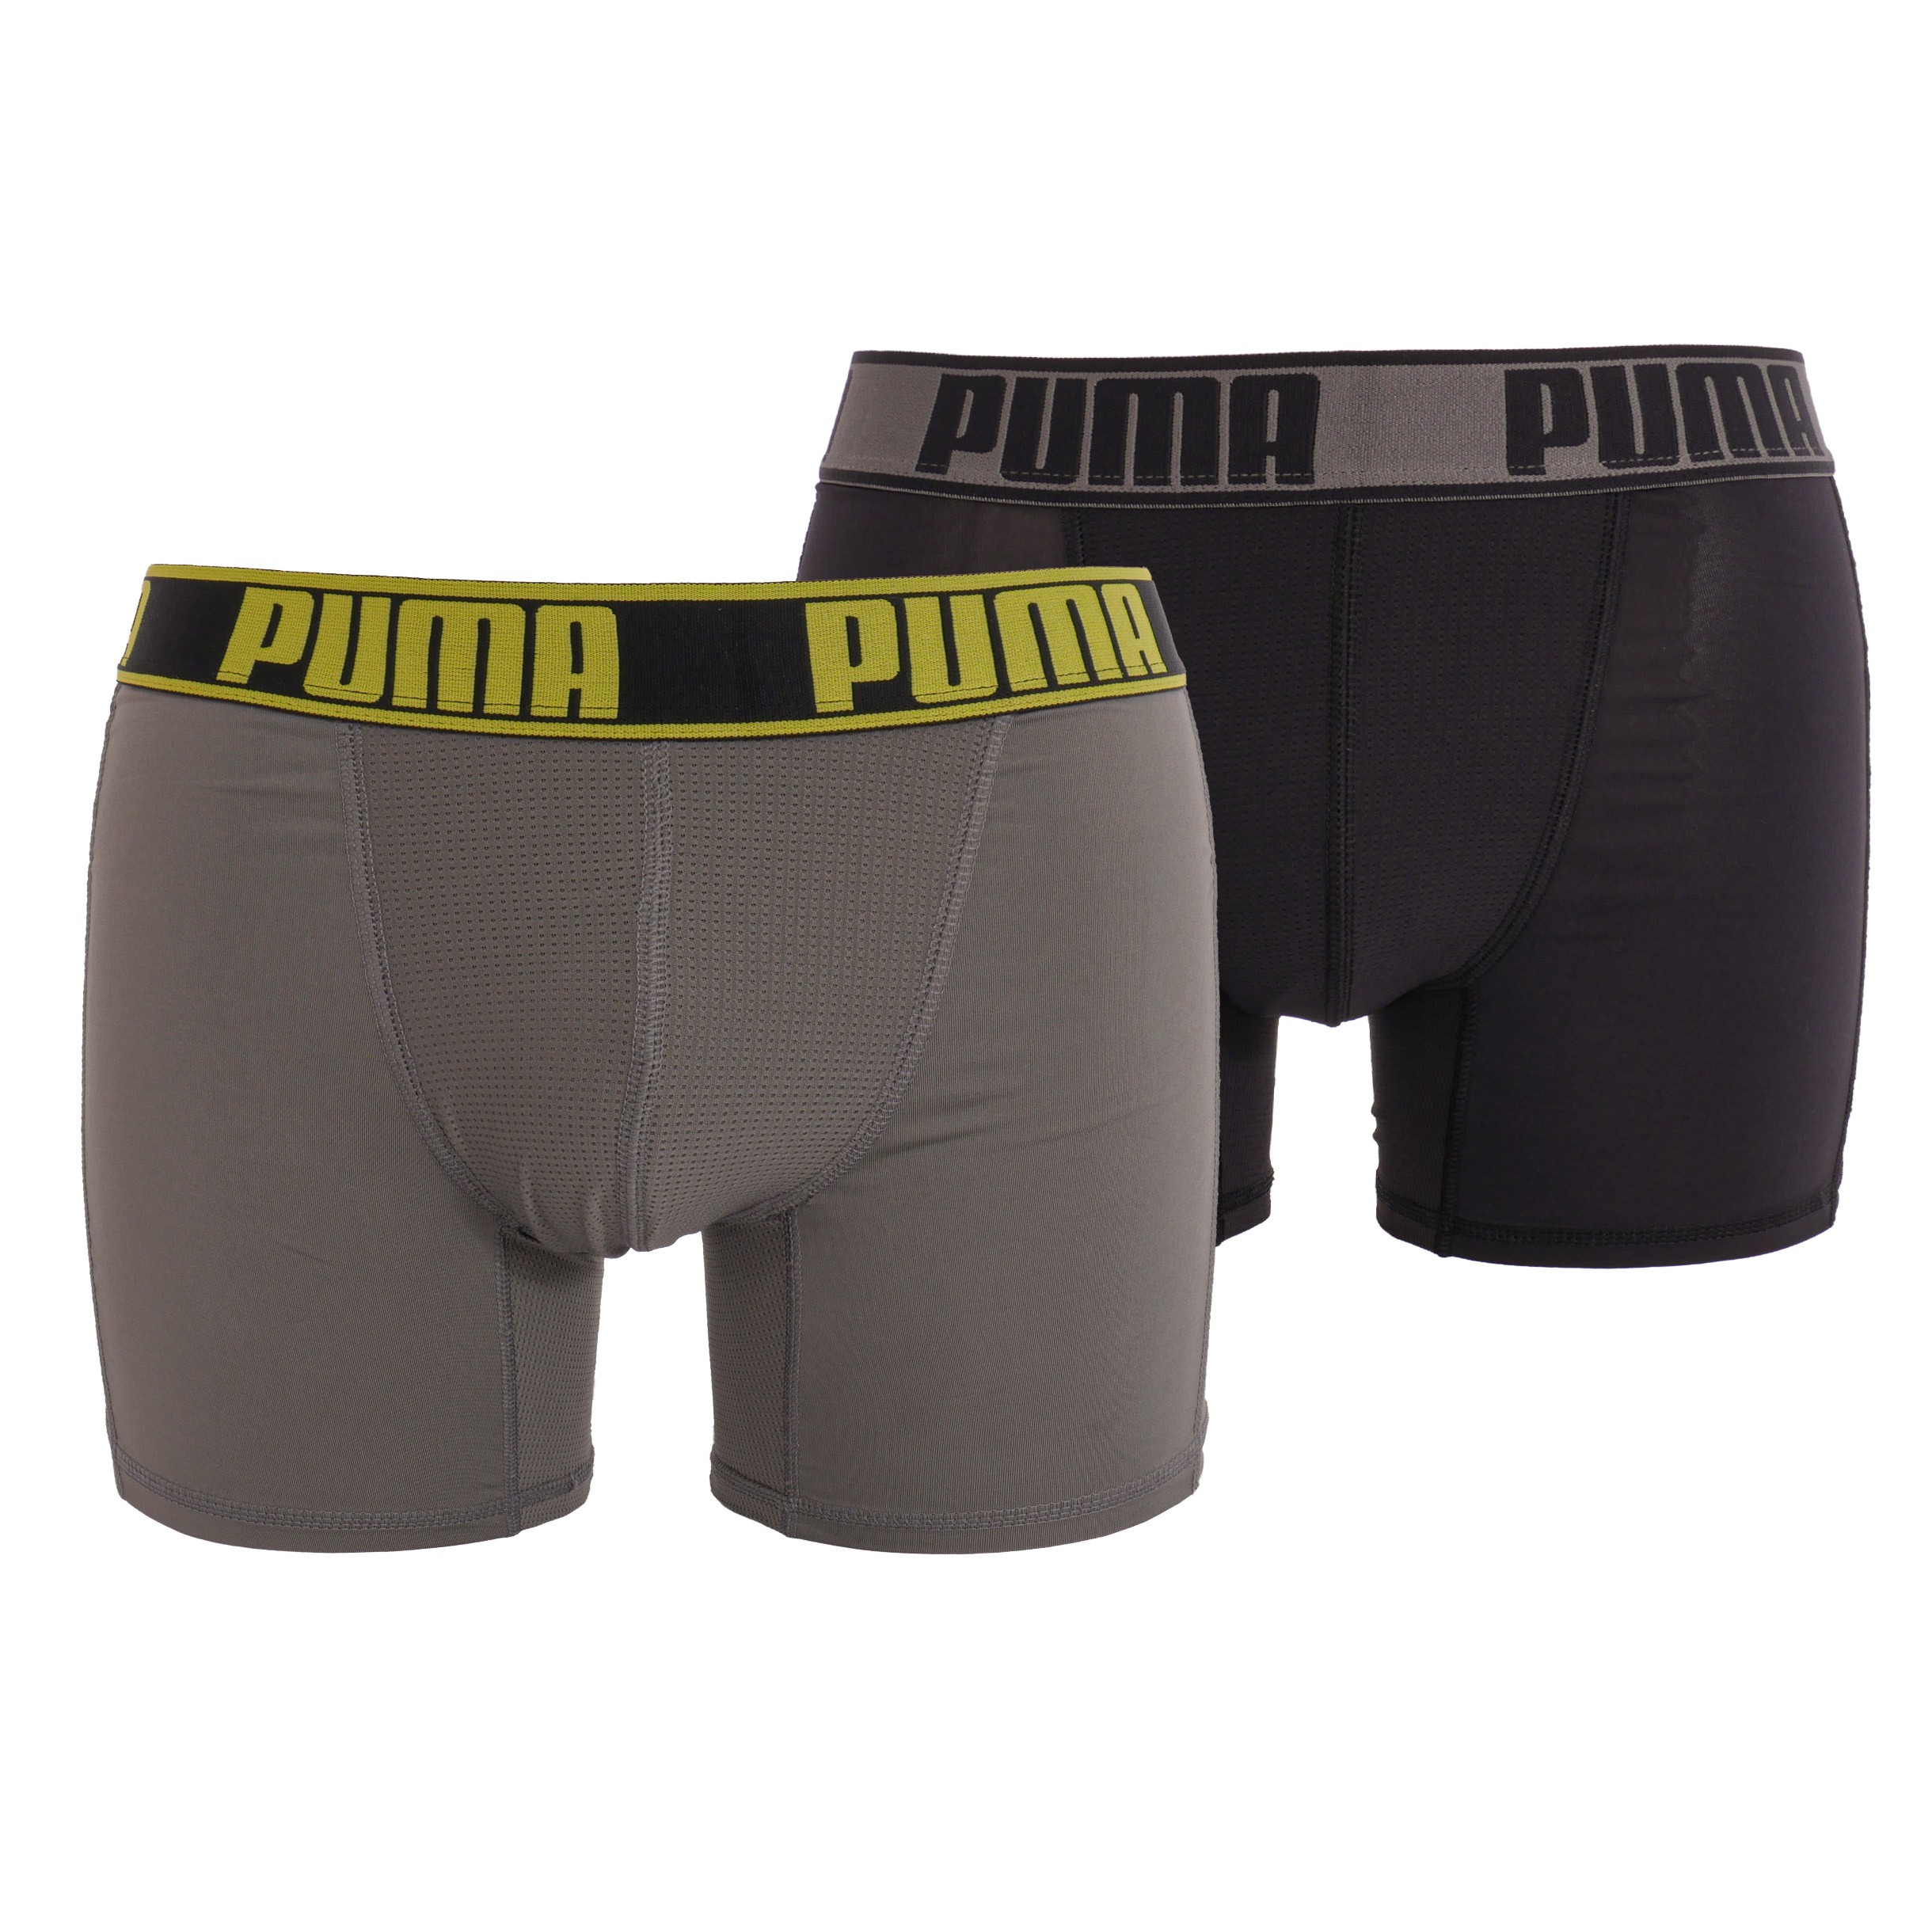 Pack of Active - gray and black - : of Boxer sho...